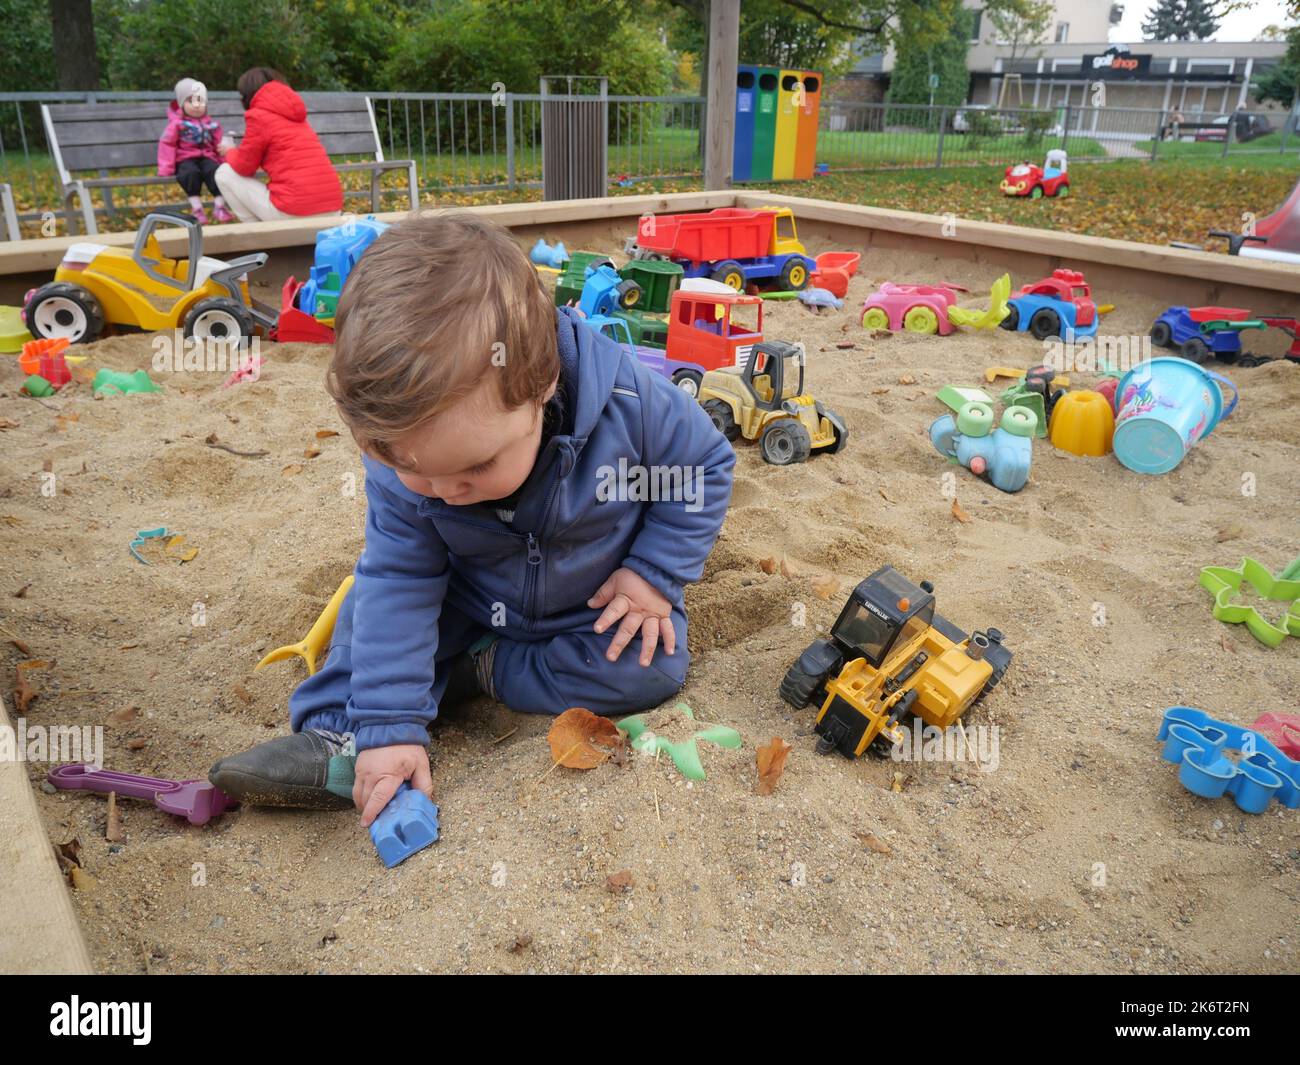 Cute small boy toddler playing in the sand on a playground. Child sitting in a sandpit holding a plastic toy, with other toys in the background. Stock Photo